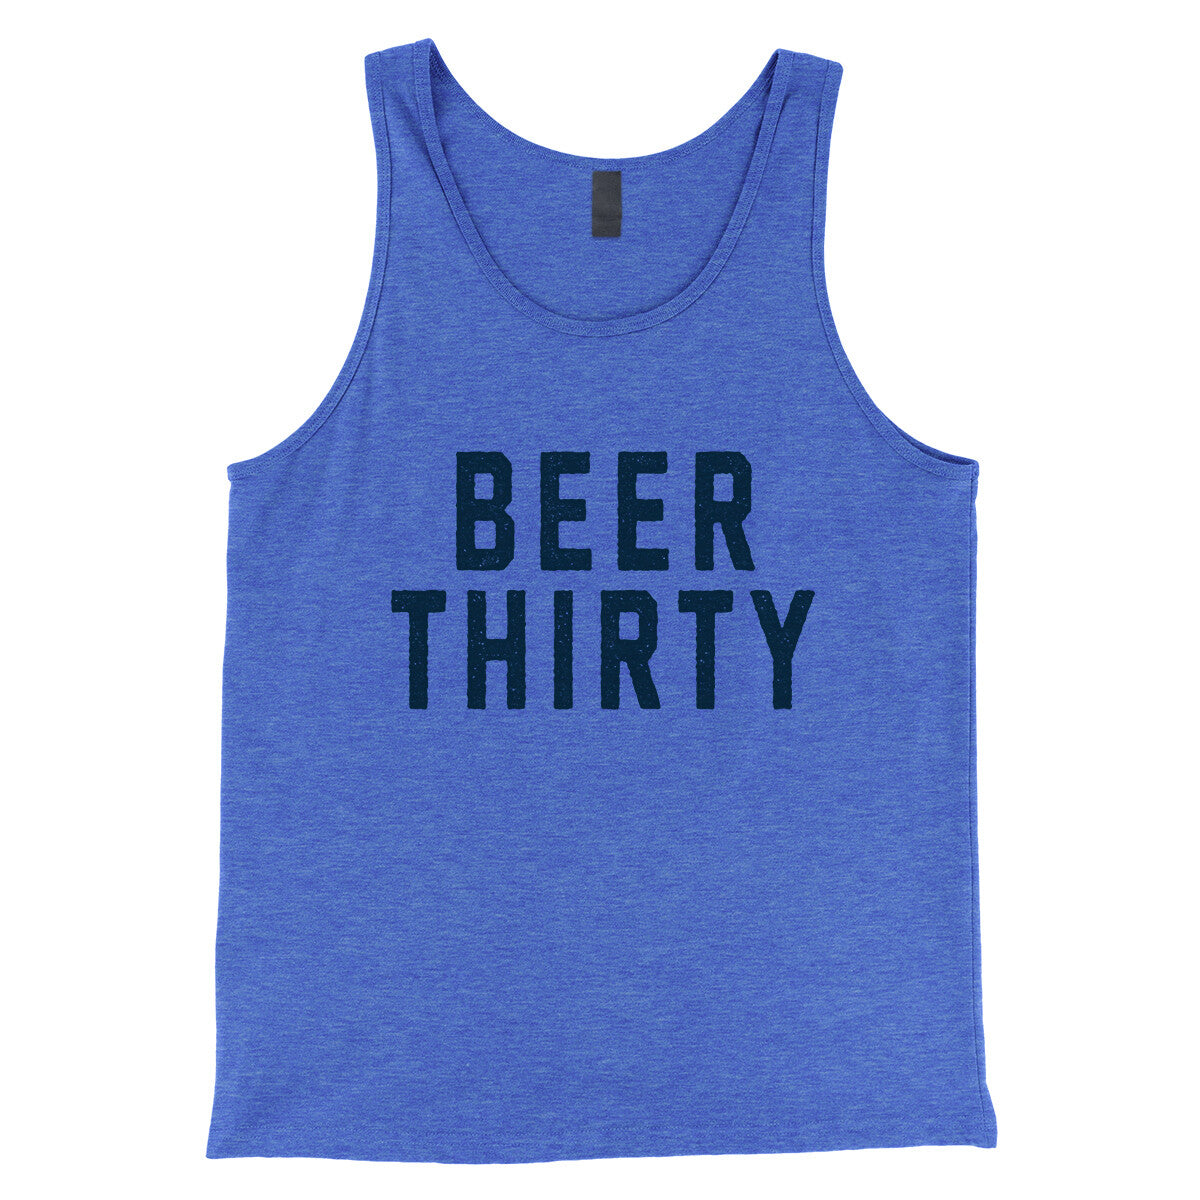 Beer Thirty in True Royal TriBlend Color